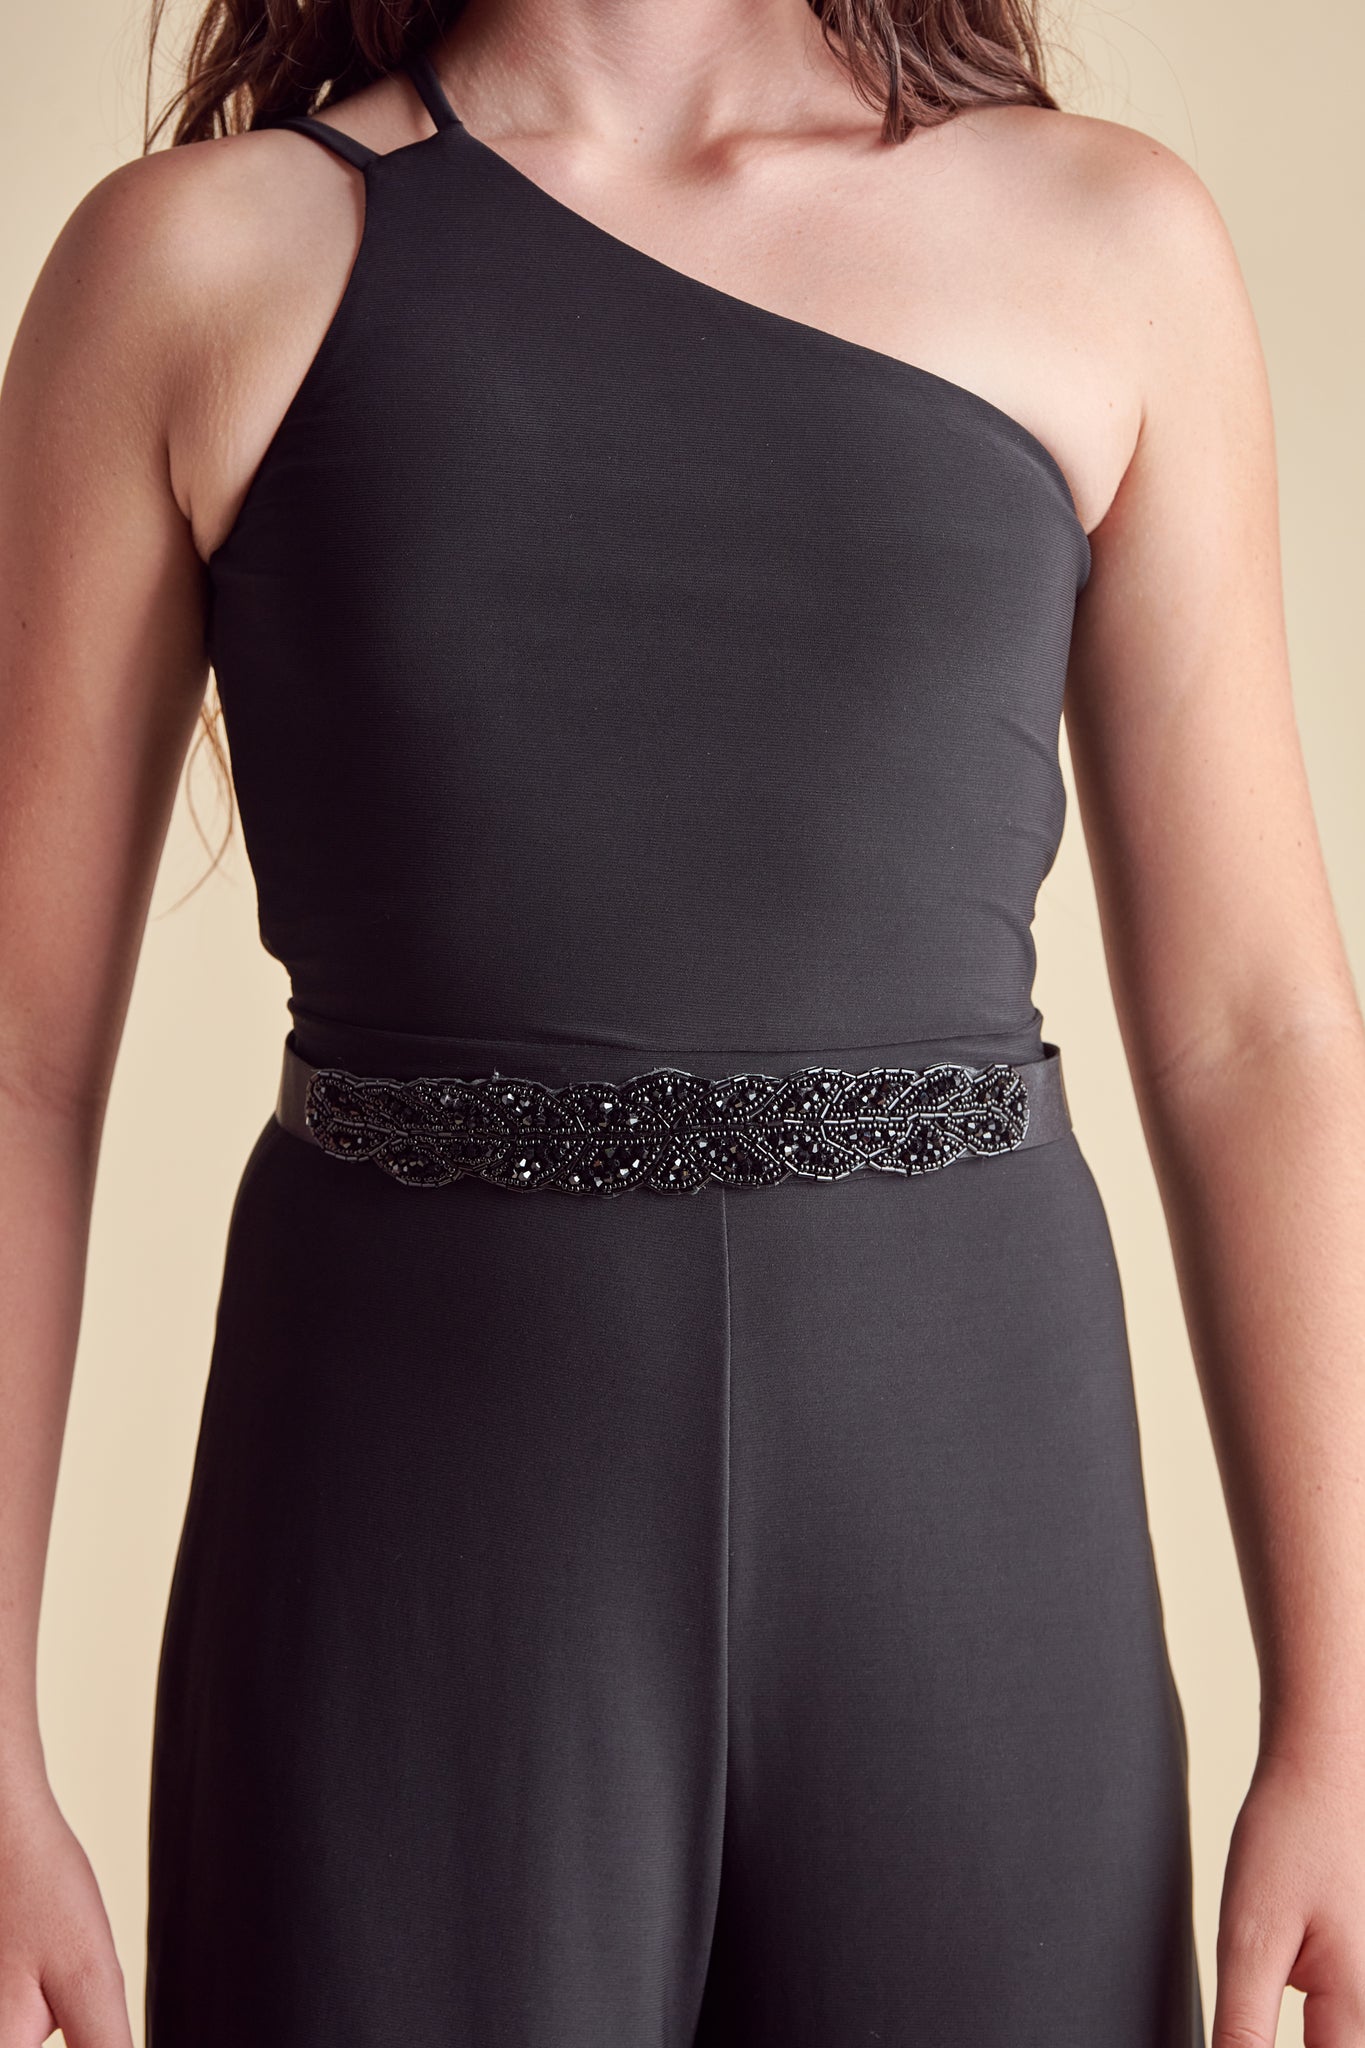 Beaded braid belt in black with elasticated band and clasp in back.